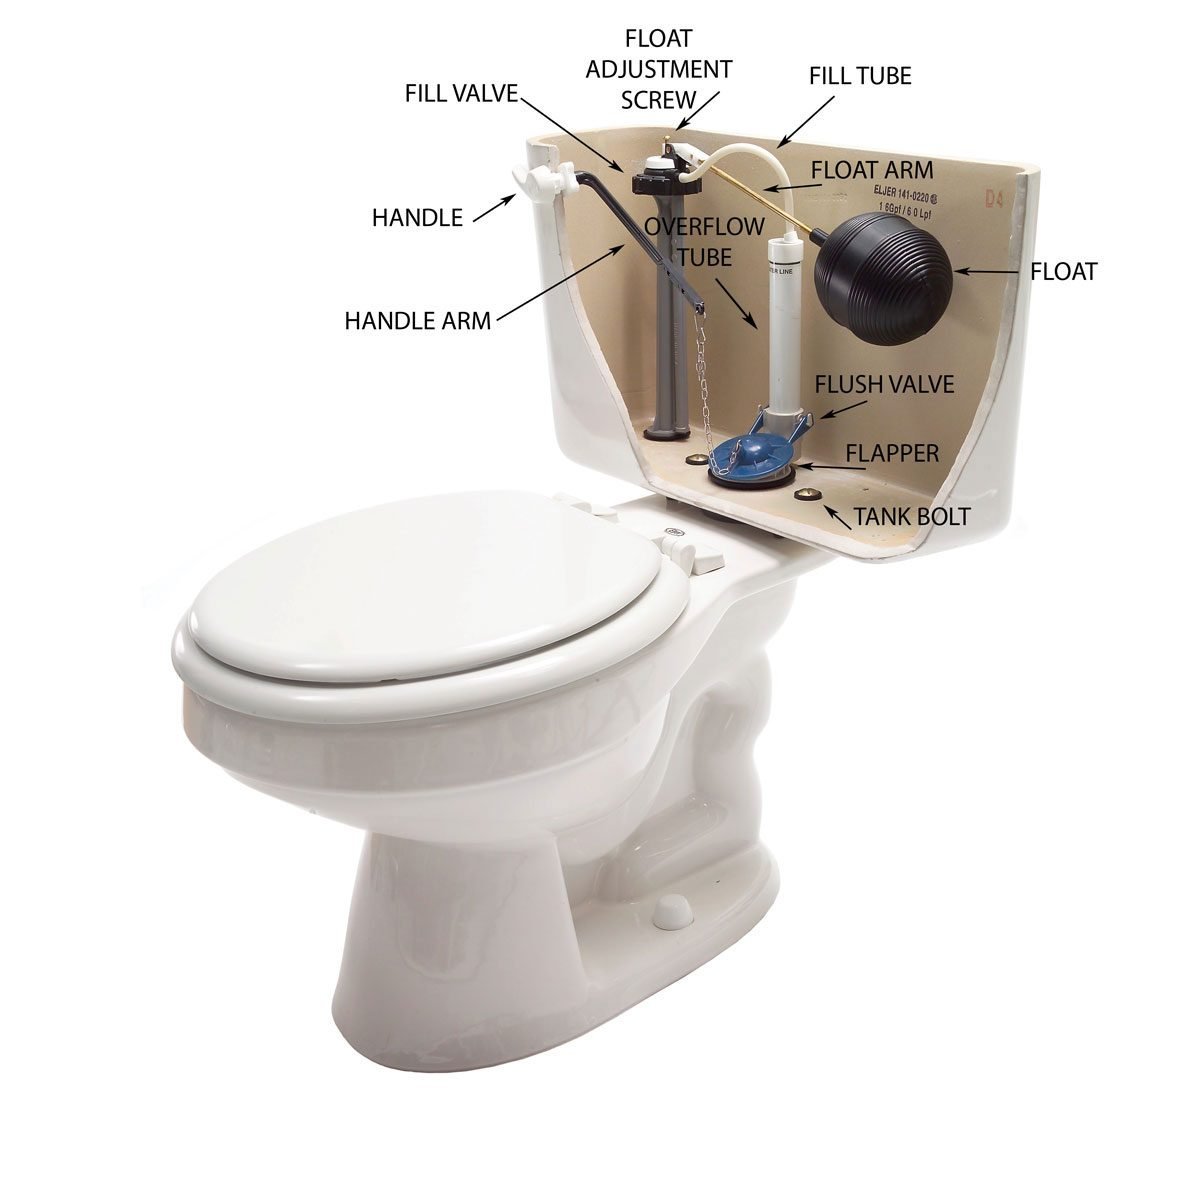 Toilet Anatomy 101: Your Toilet Parts and How They Work